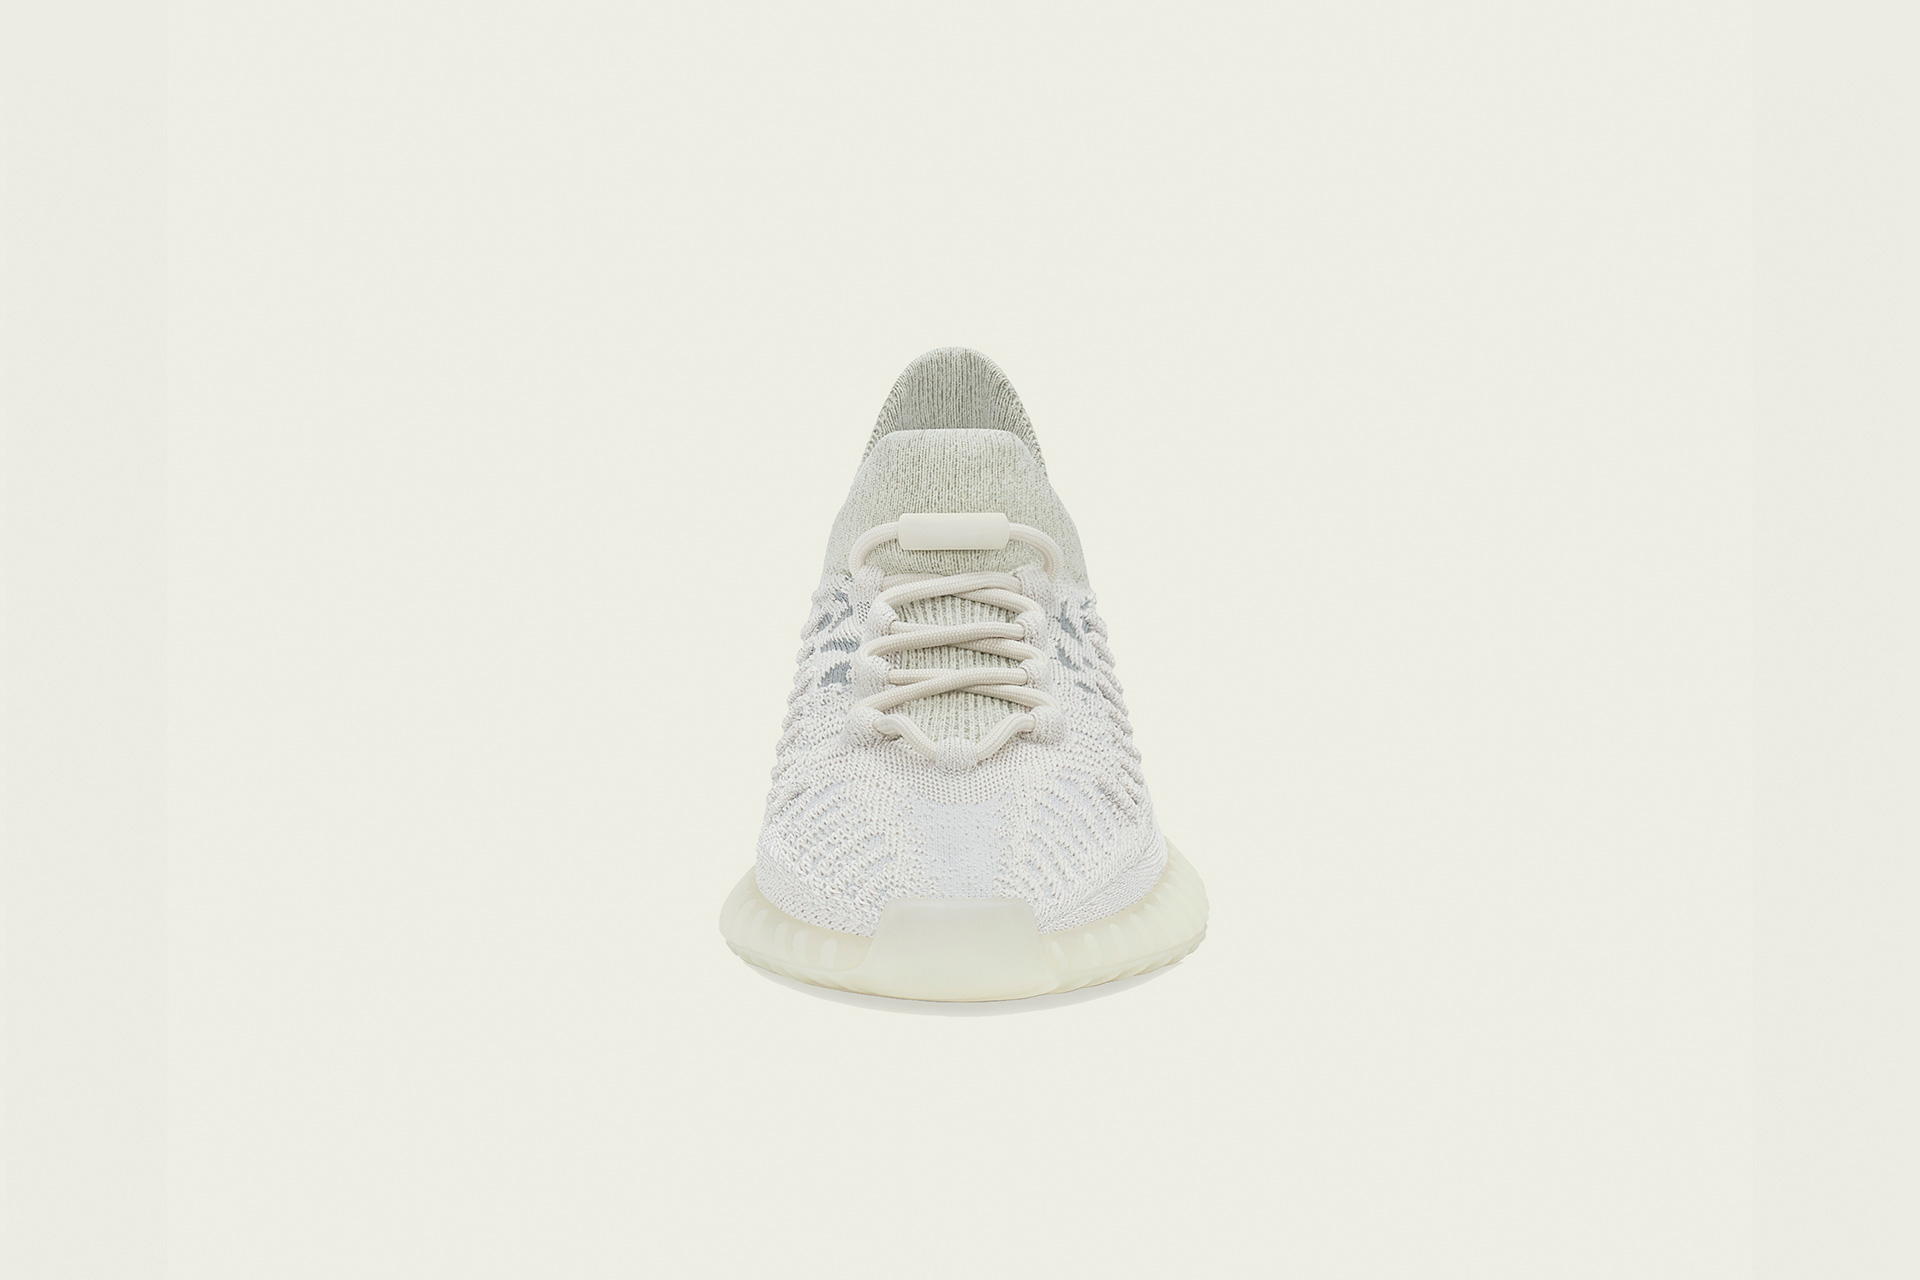 YEEZY: Off-White Yzy 350 V2 CMPCT Sneakers